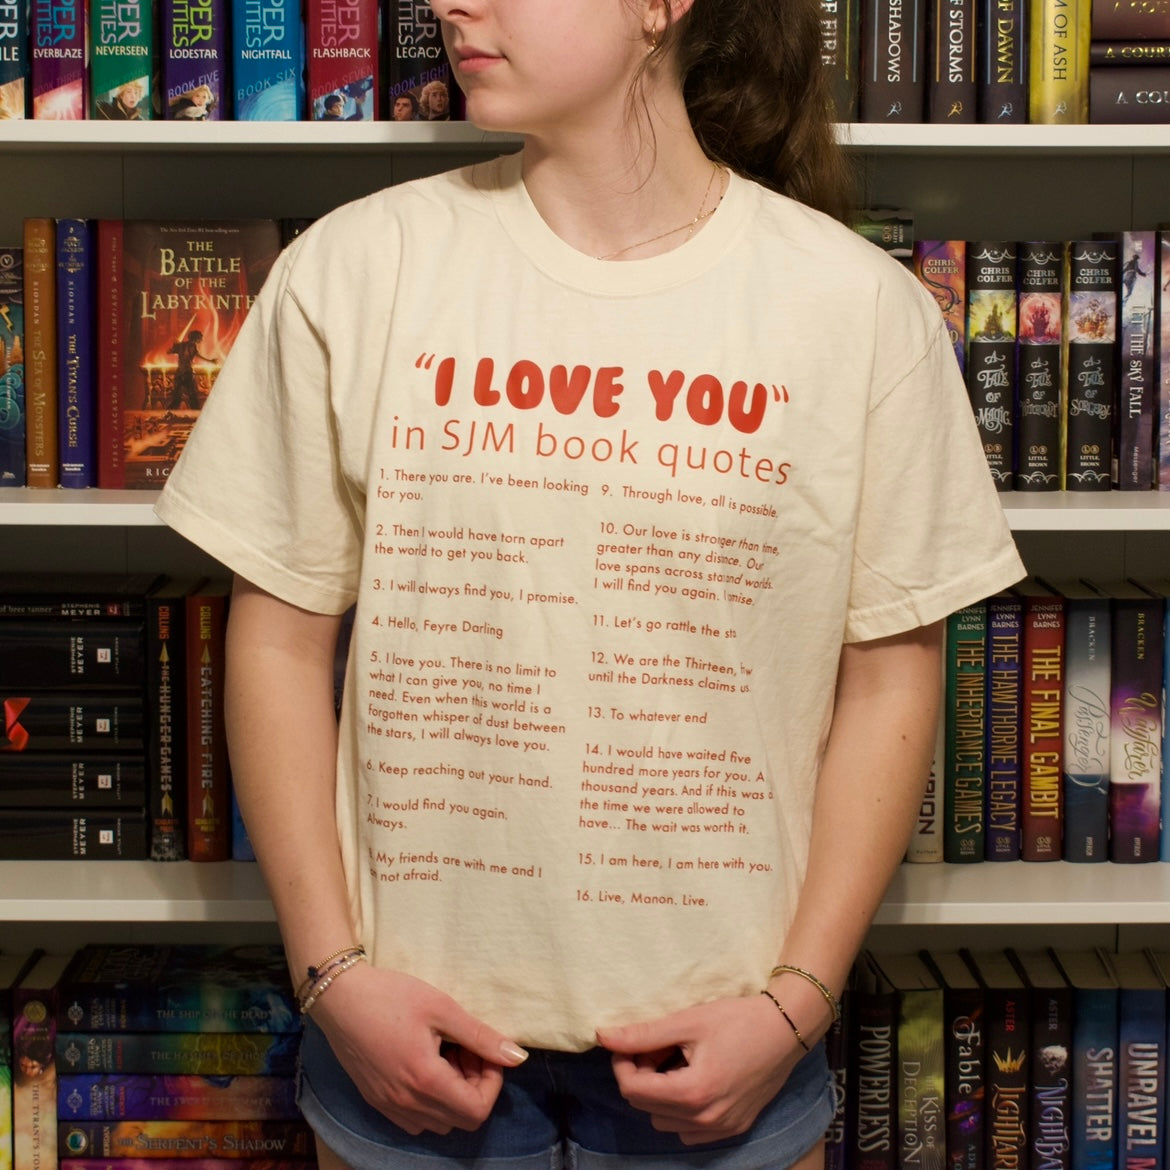 “I LOVE YOU” in SJM Quotes T-shirt